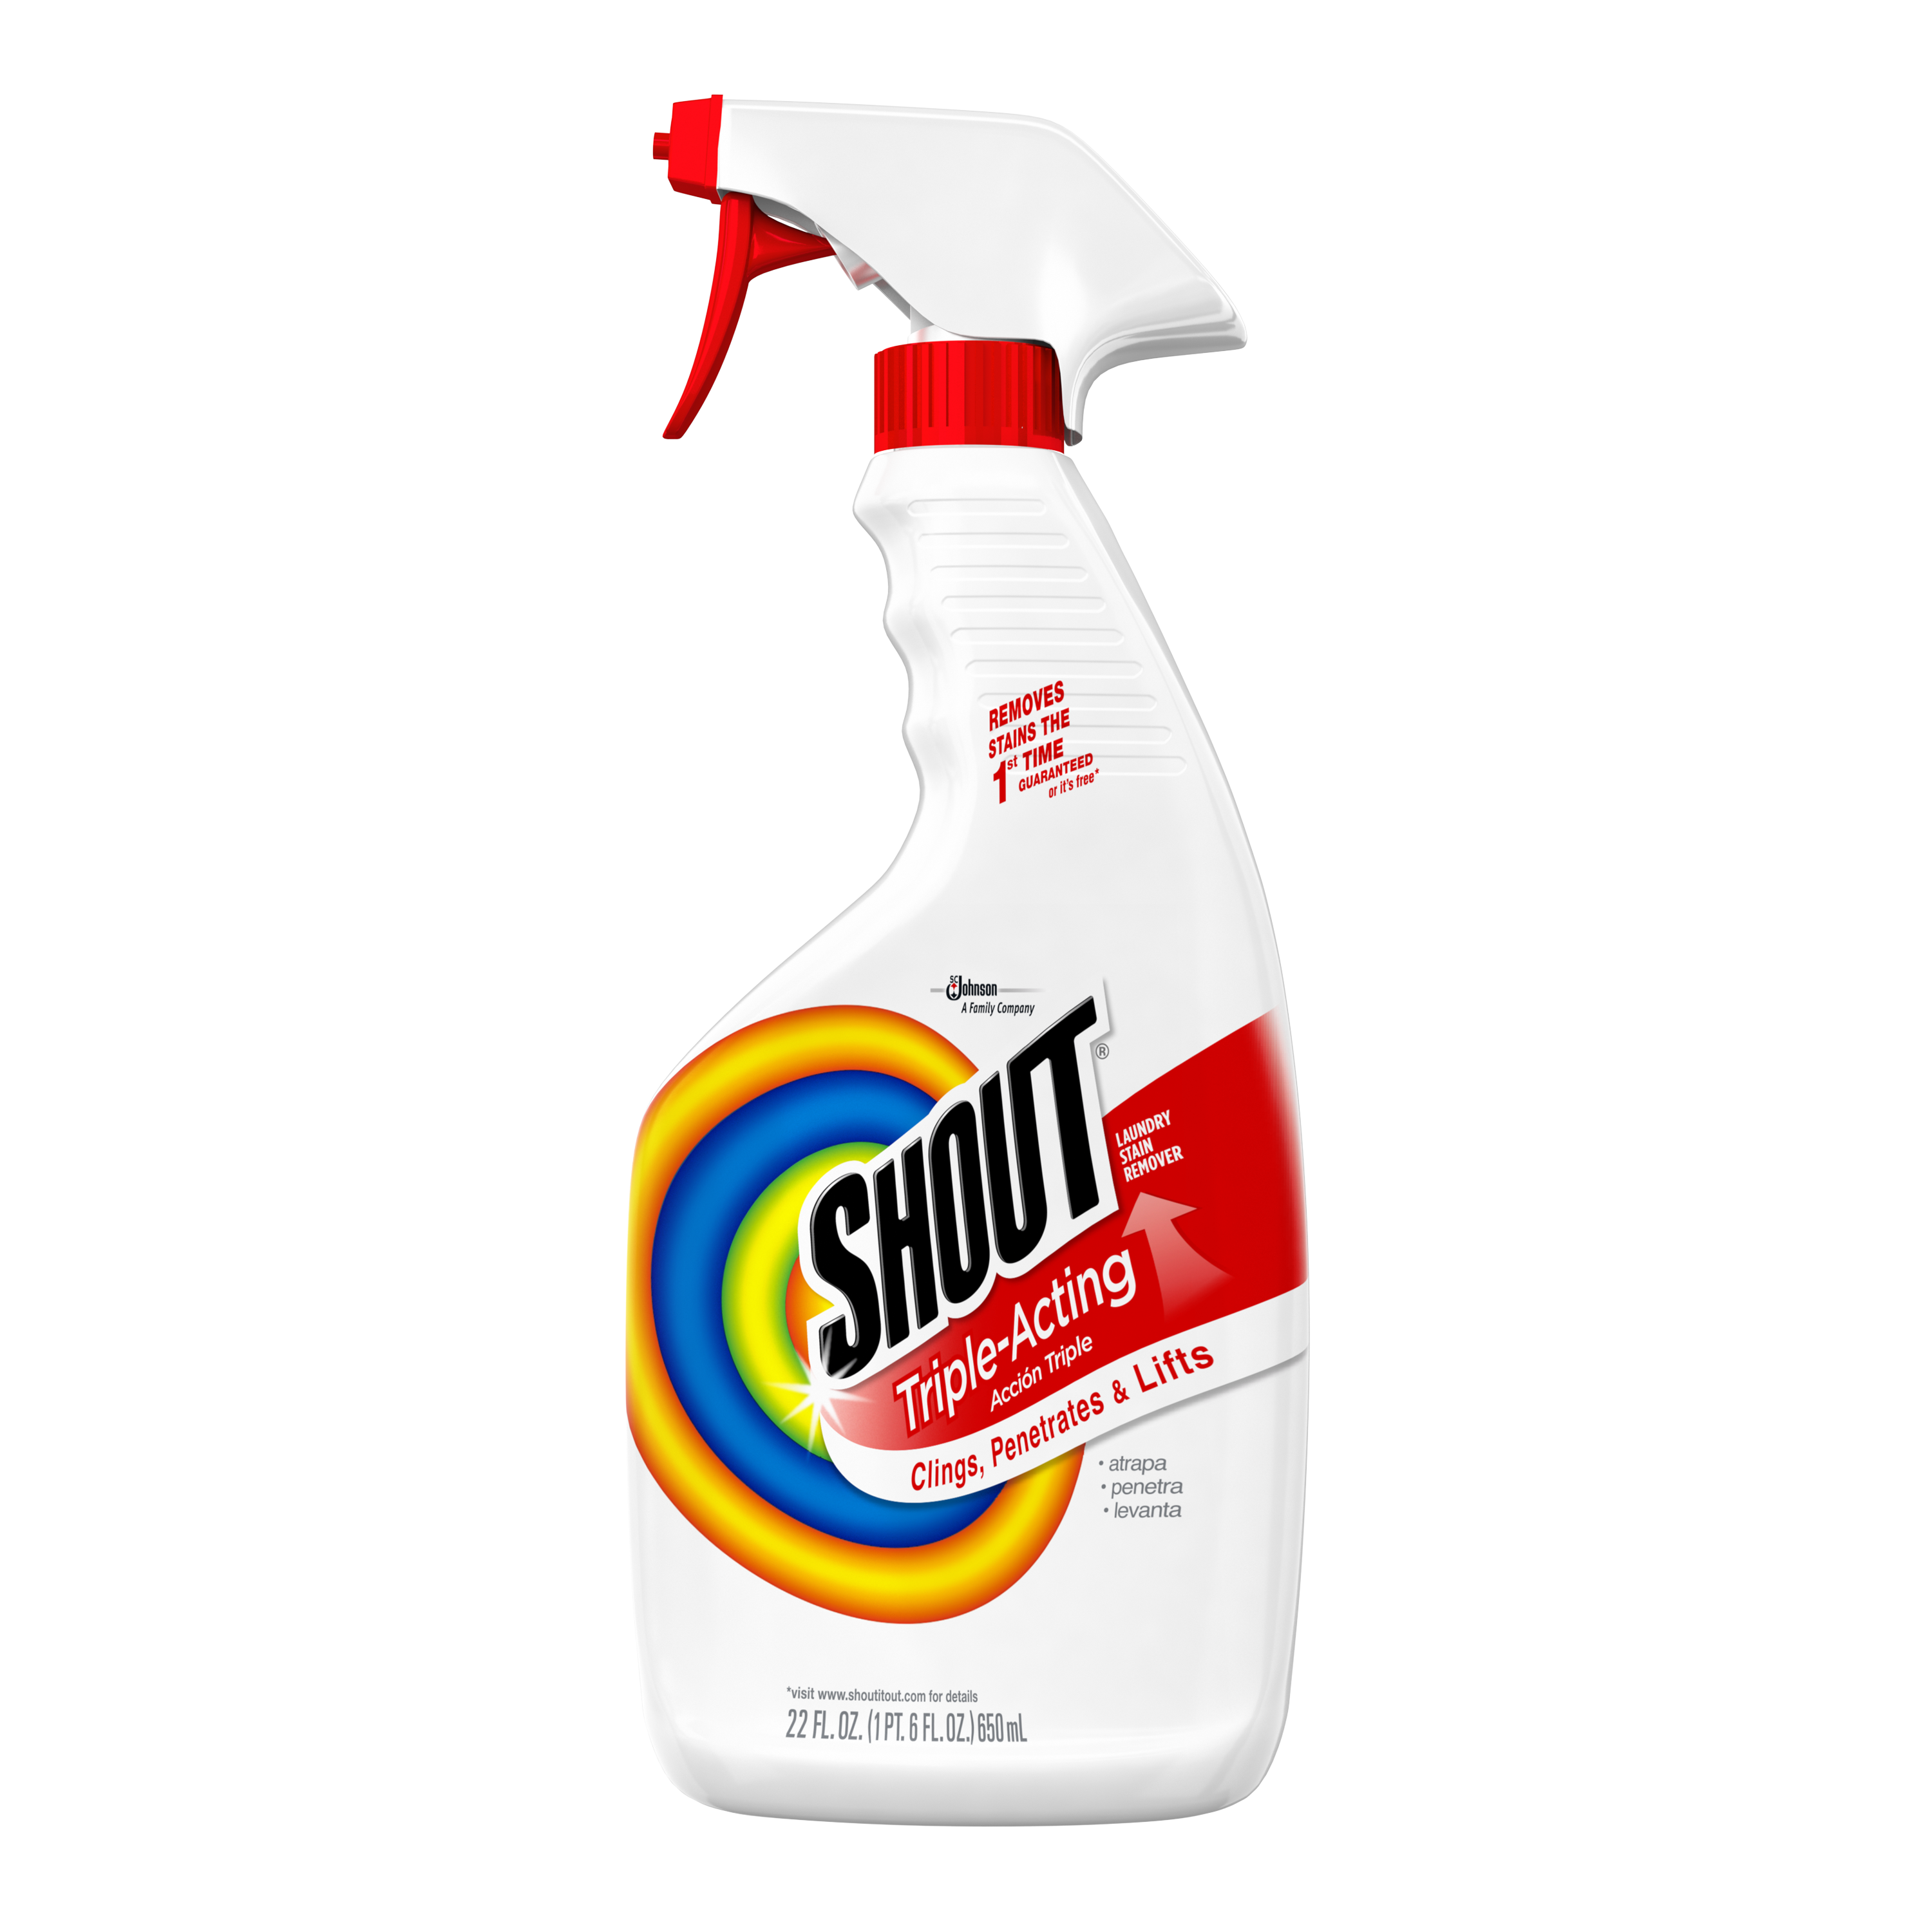 https://imperialsoap.com/wp-content/uploads/2018/10/composite-page-thumbnail-shout-laundry-stain-removers.png